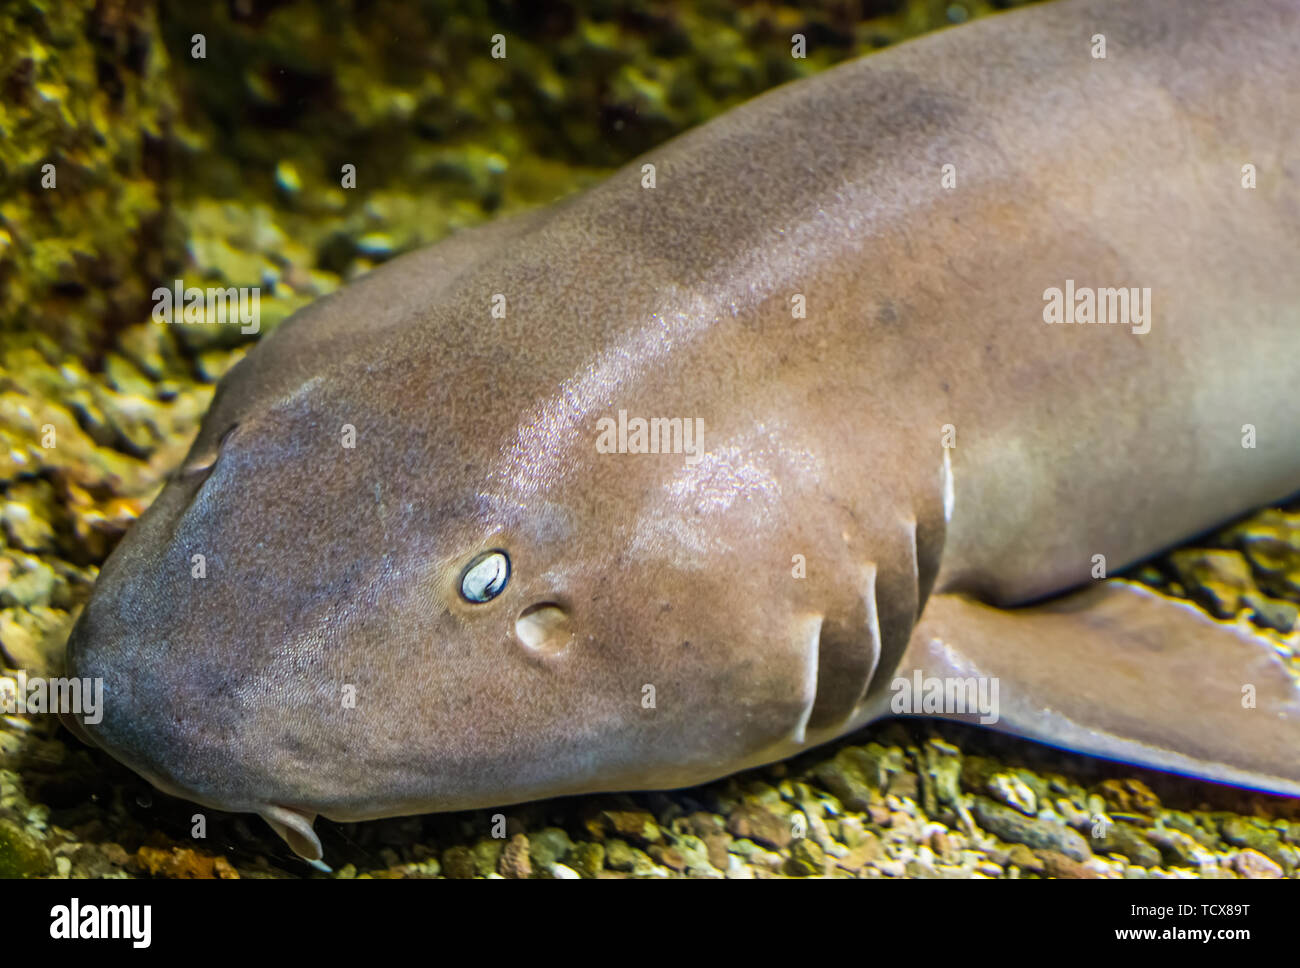 the face of a brown banded bamboo shark in closeup, tropical fish from the indo-pacific ocean Stock Photo